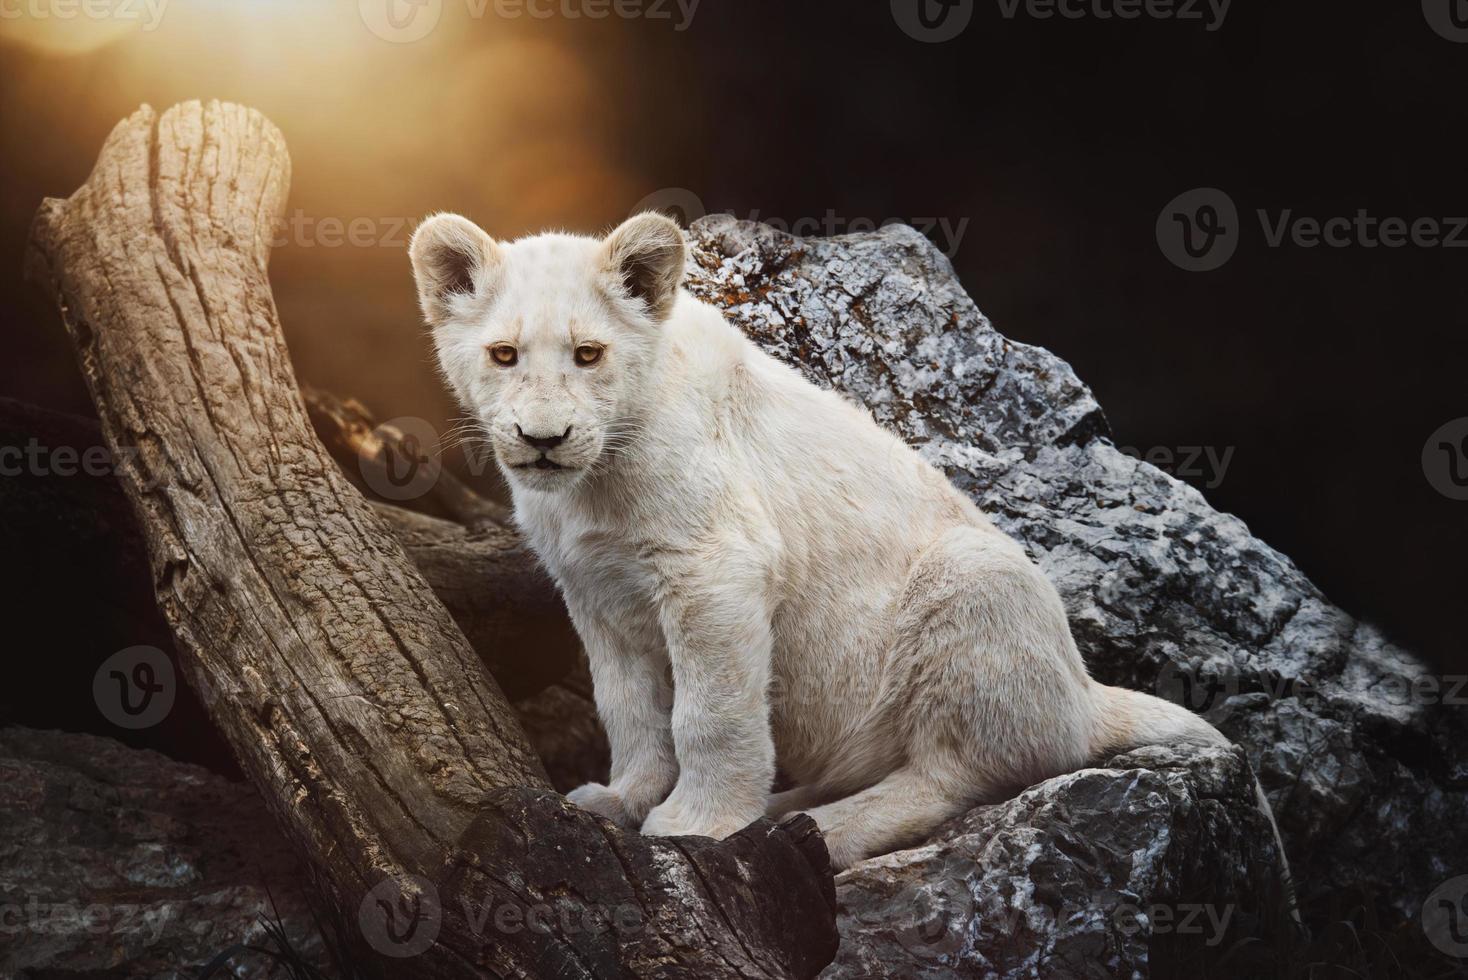 The South African Lion Panthera leo krugeri small cube photo